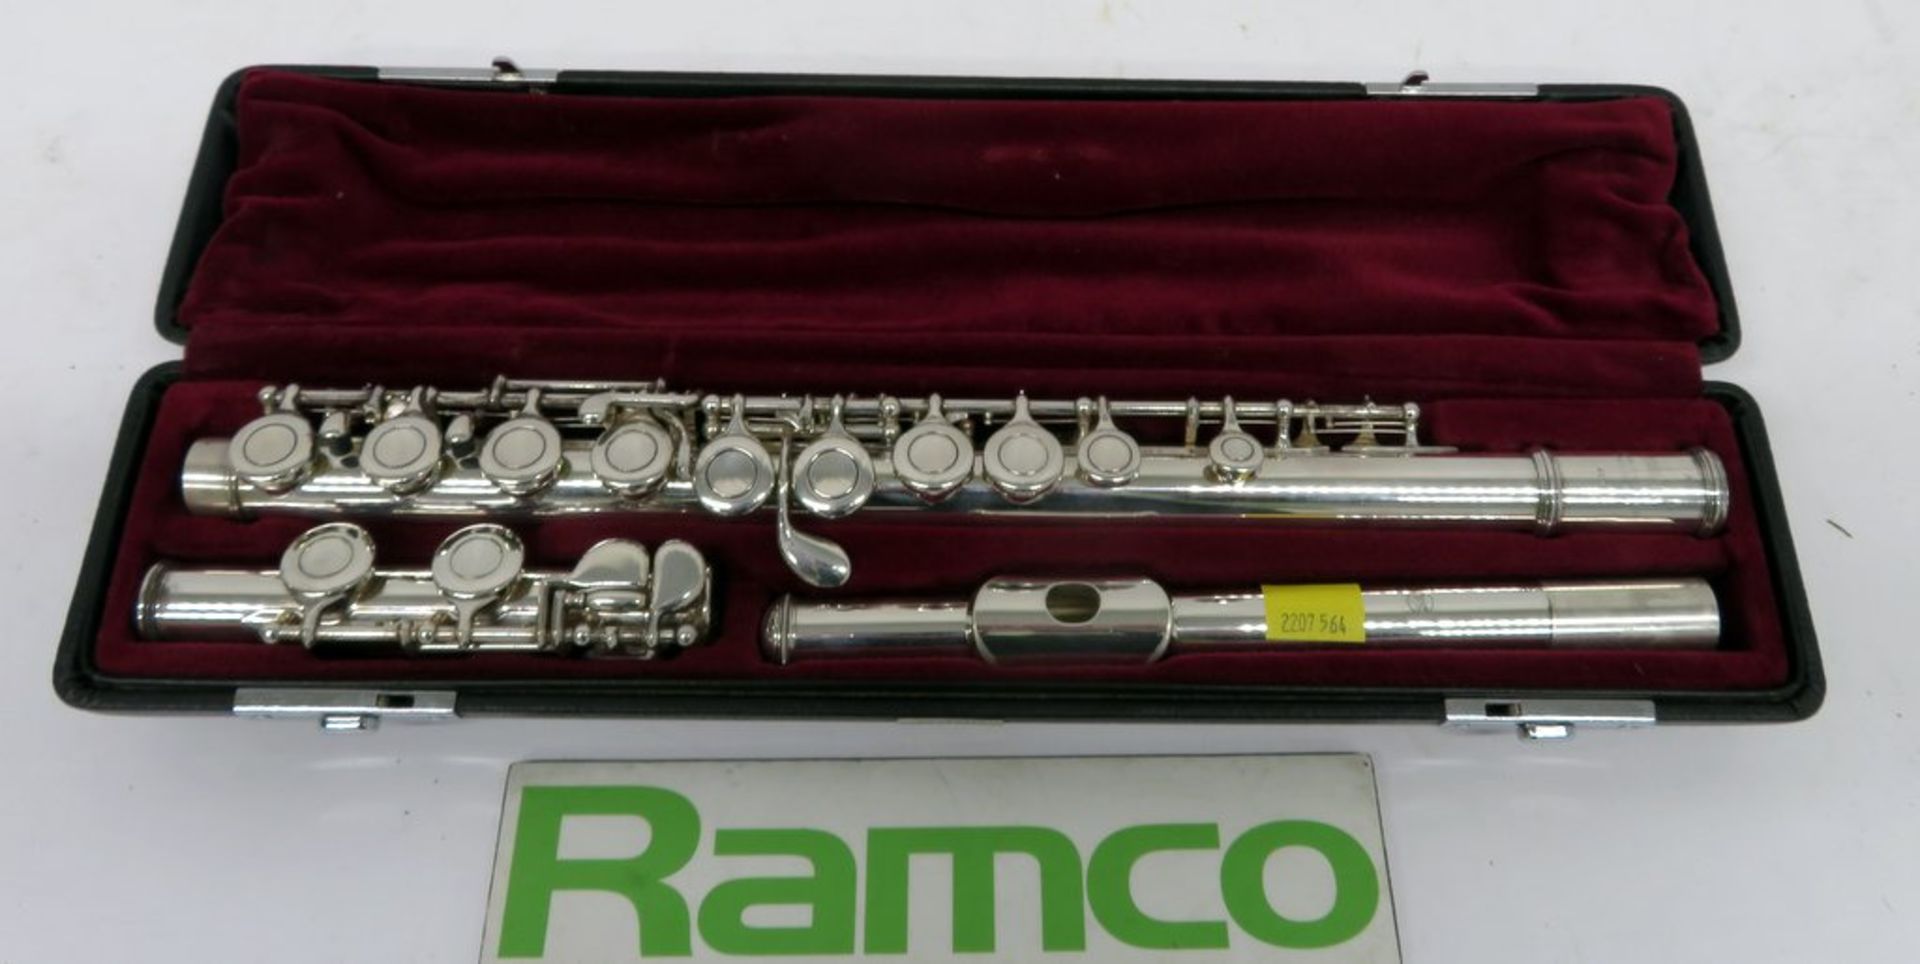 Yamaha 411 Flute Series II With Case. Serial Number: 311776. Please Note That This Item H